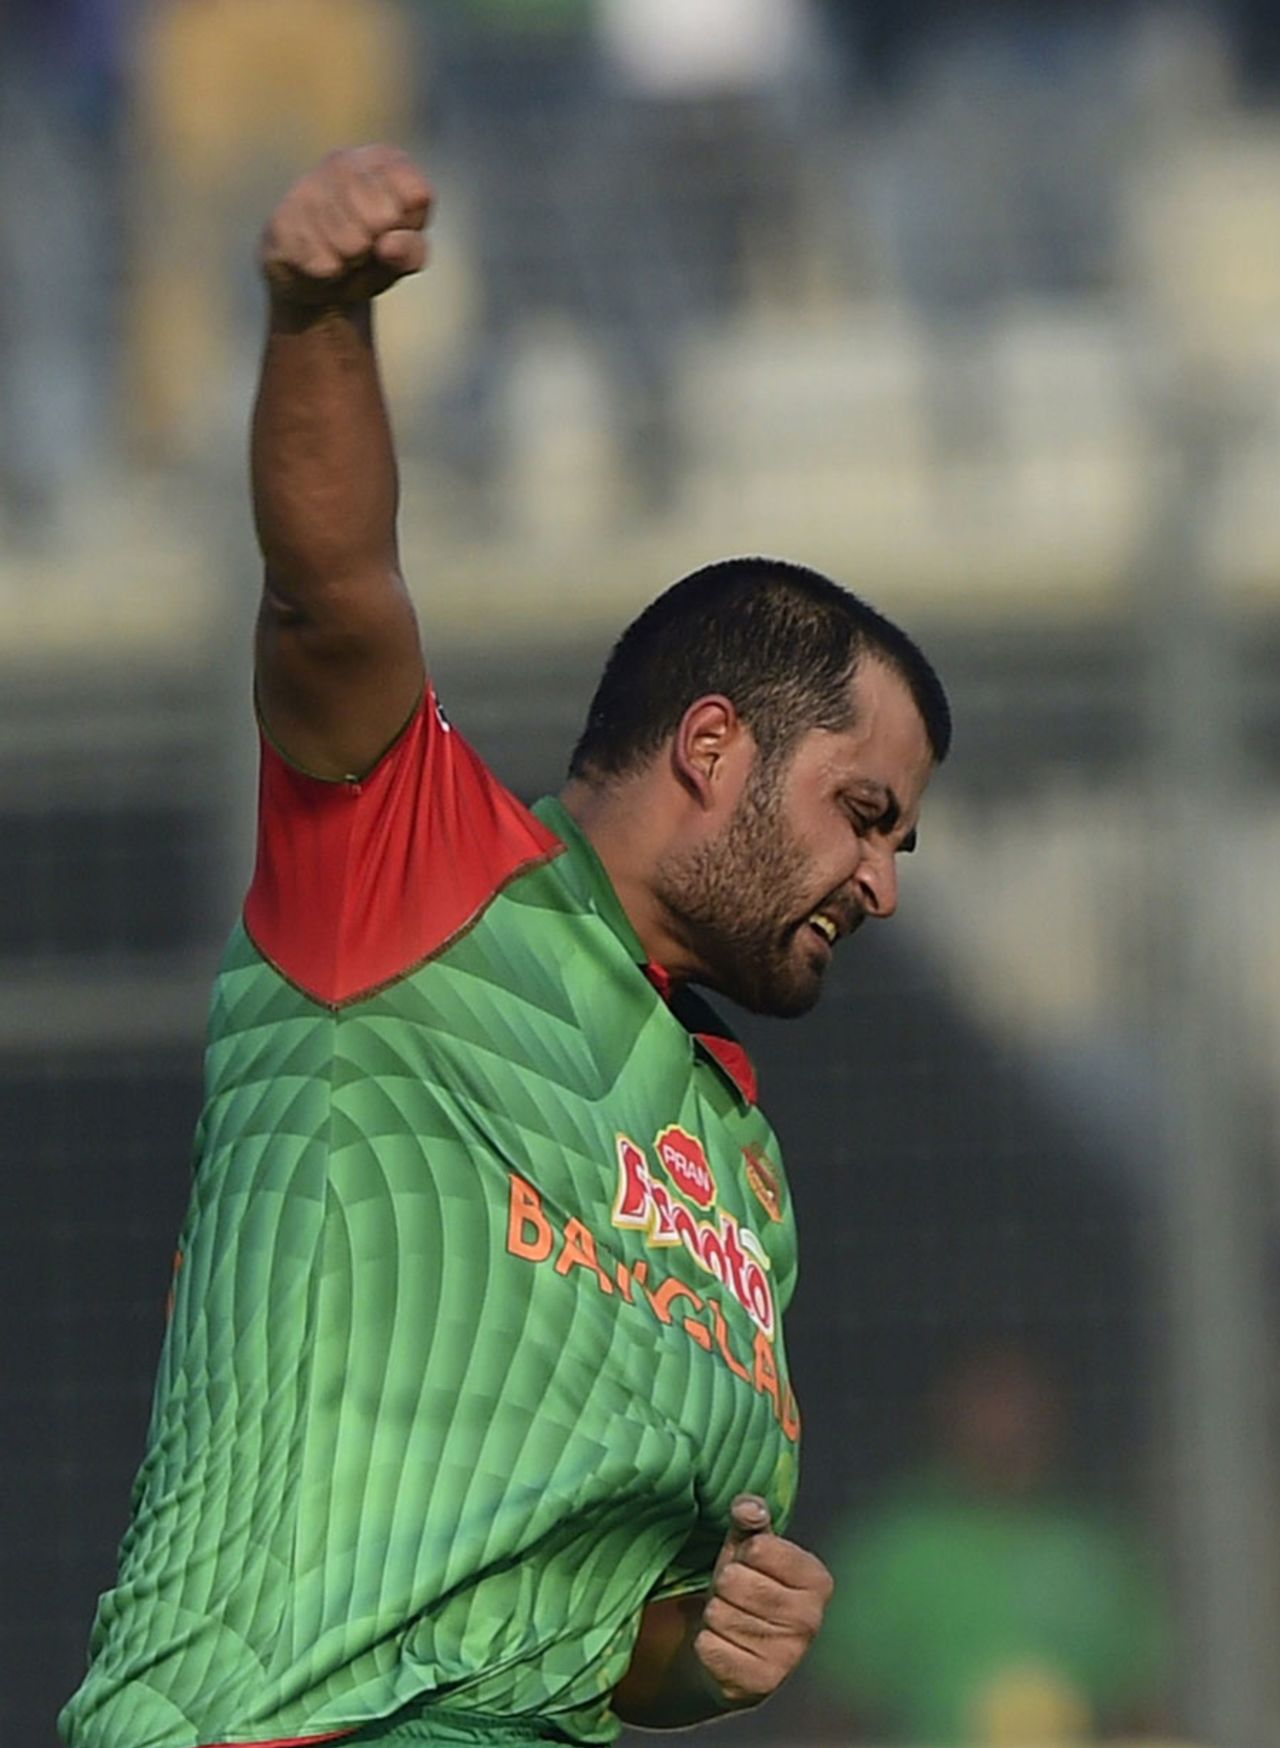 Tamim Iqbal punches the air in delight after reaching his ton, Bangladesh v Pakistan, 1st ODI, Mirpur, April 17, 2015